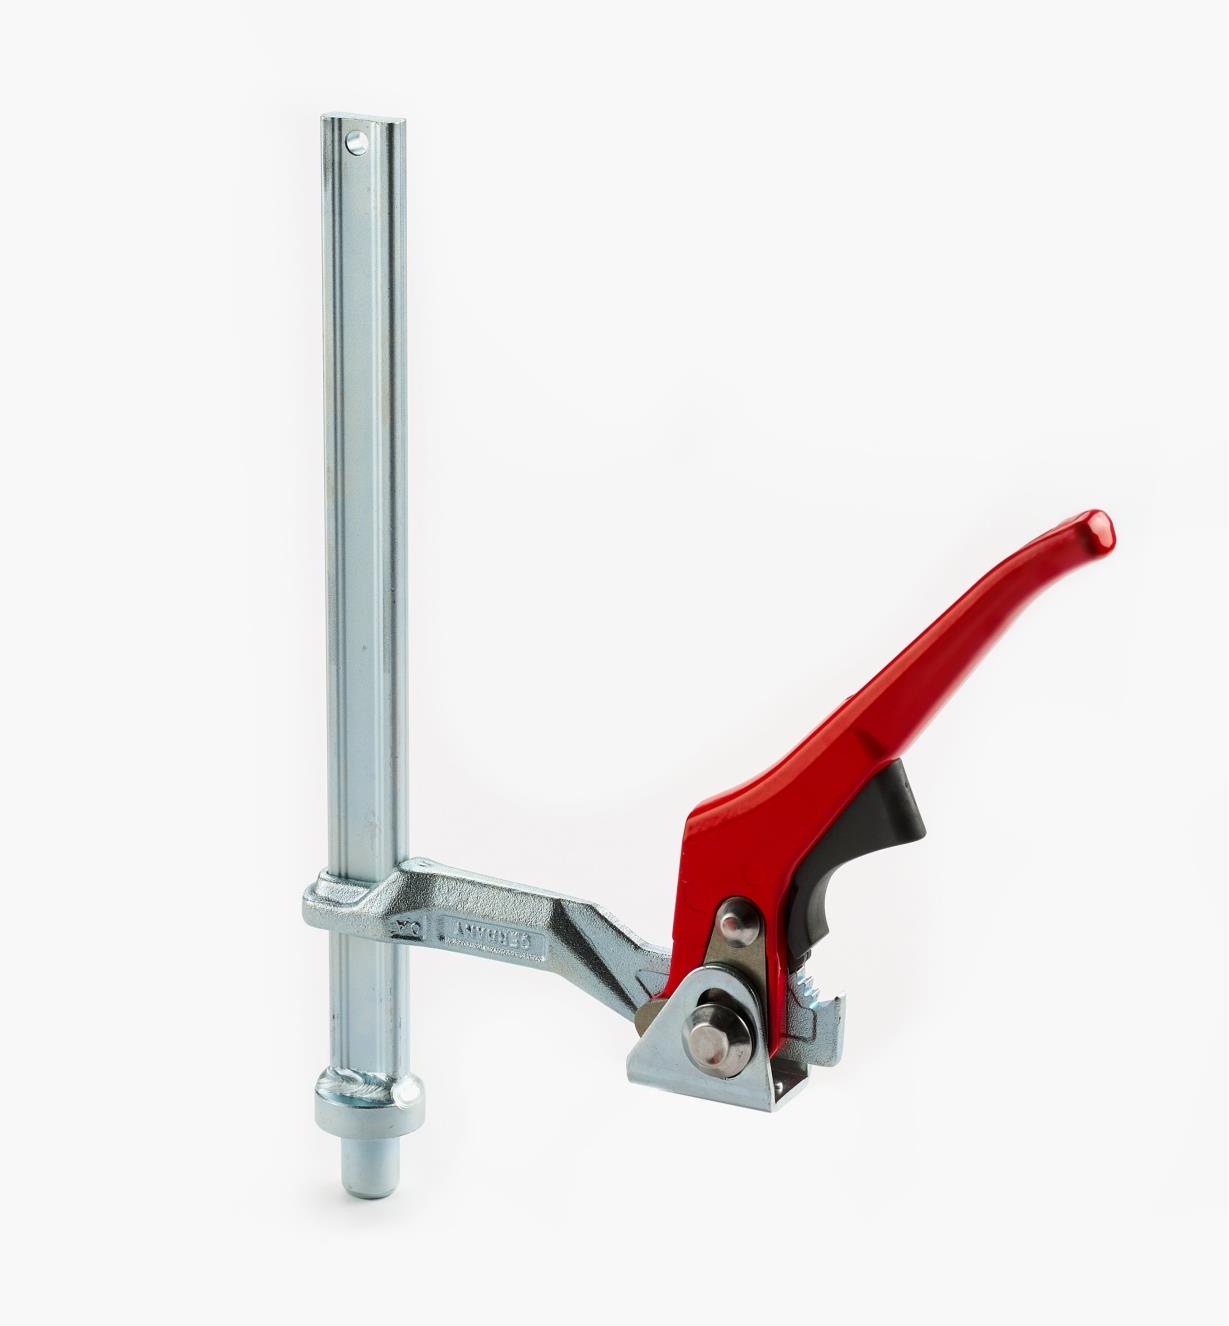 17F4003 - Bessey Hold-Down Clamp, Lever Handle